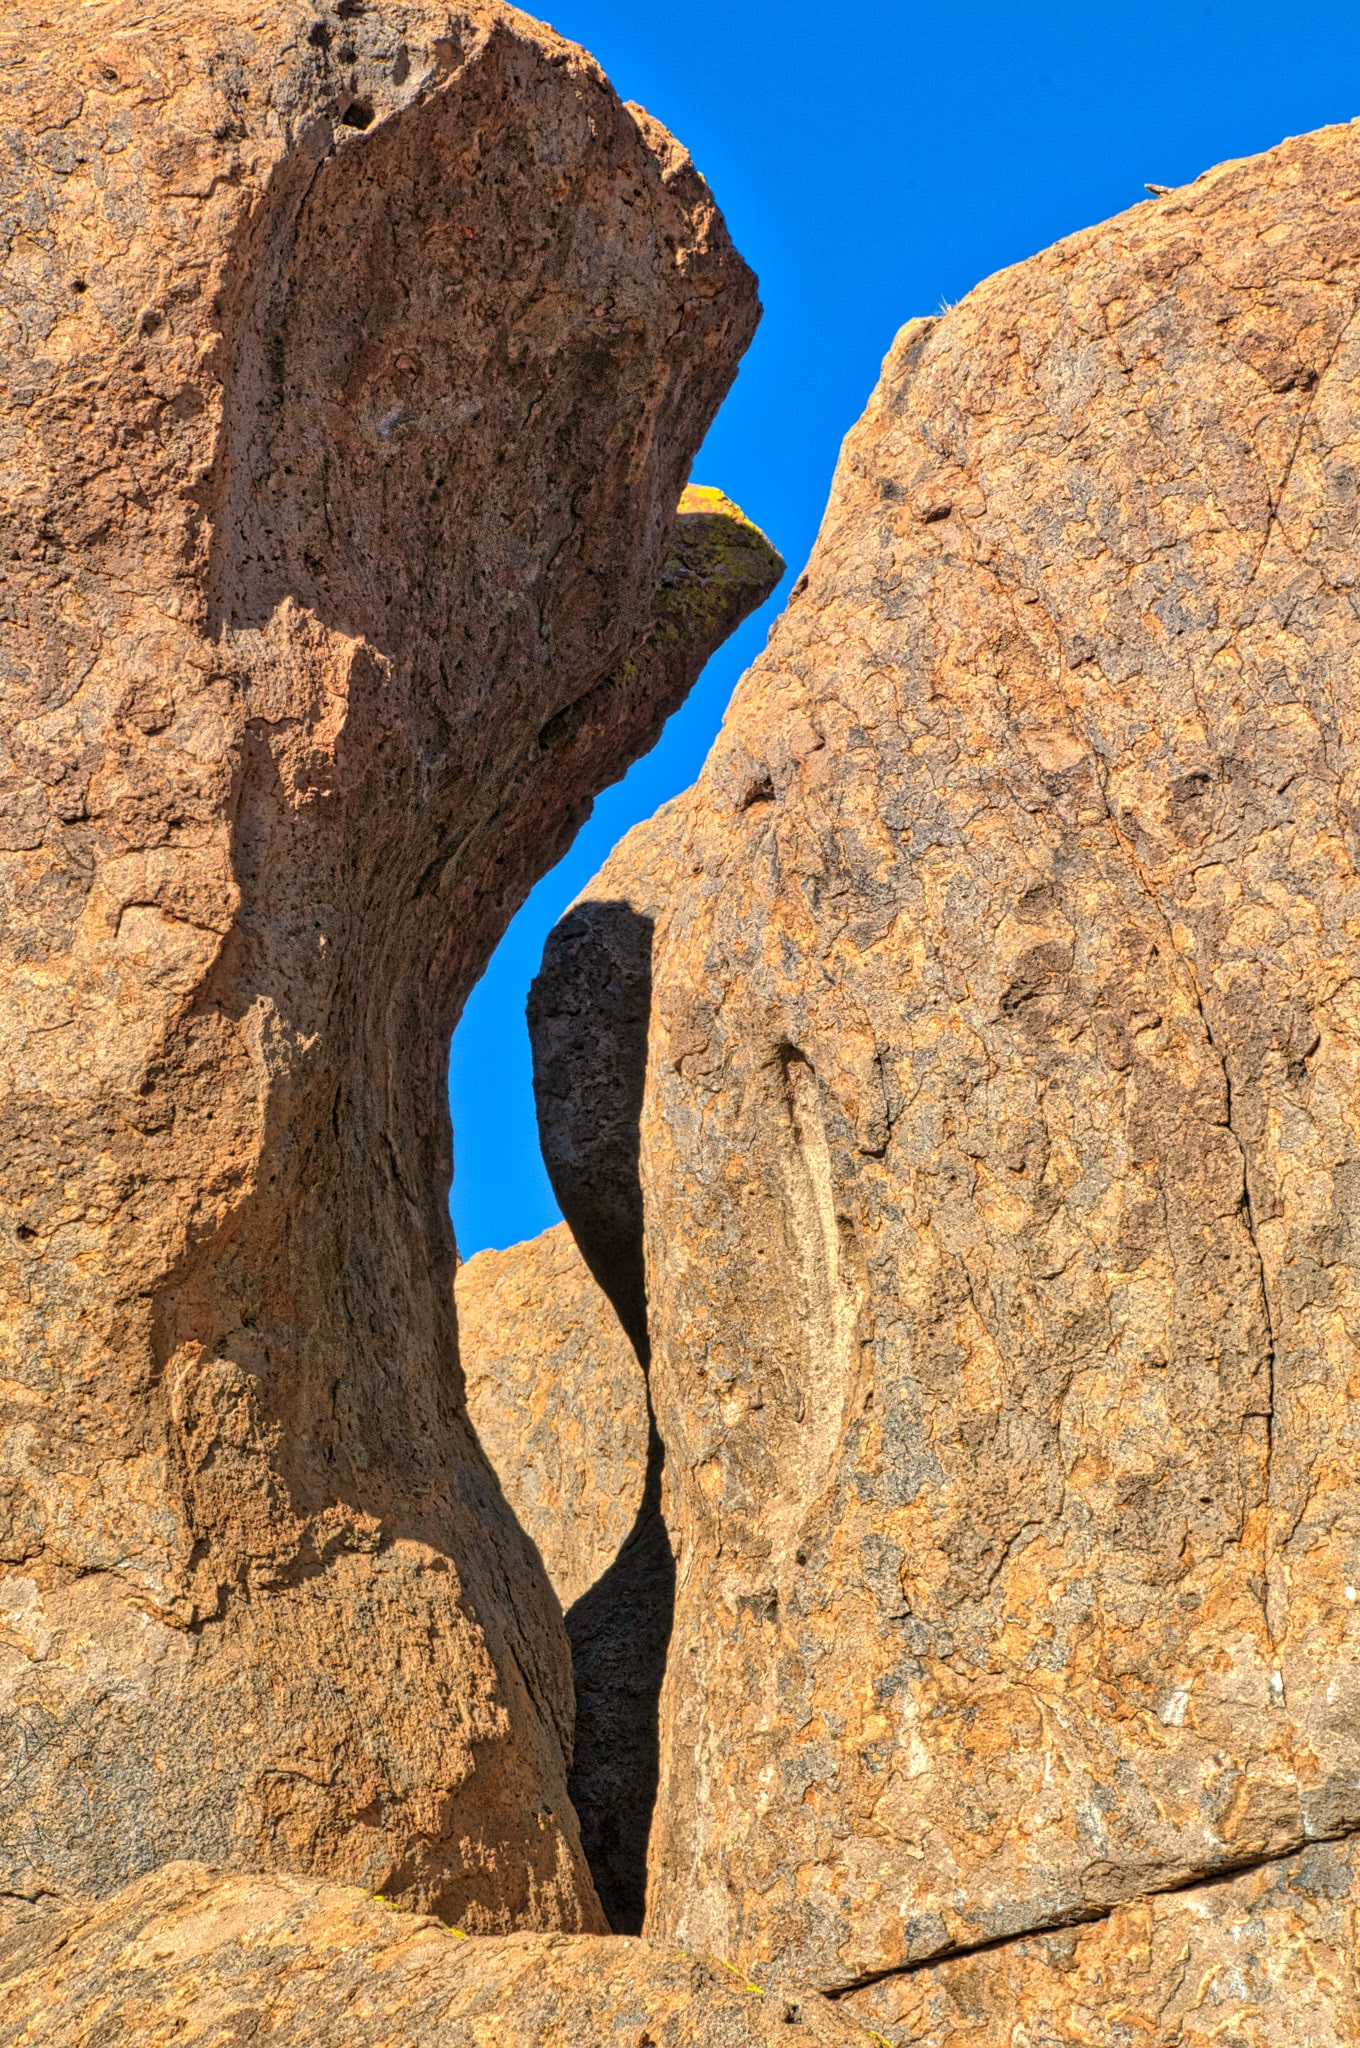 A shadow provides a sinuous component to this slit between two pinnacles giving the whole arrangement a sinuous quality. Taken in City of Rocks State Park between Deming and Silver City, New Mexico.